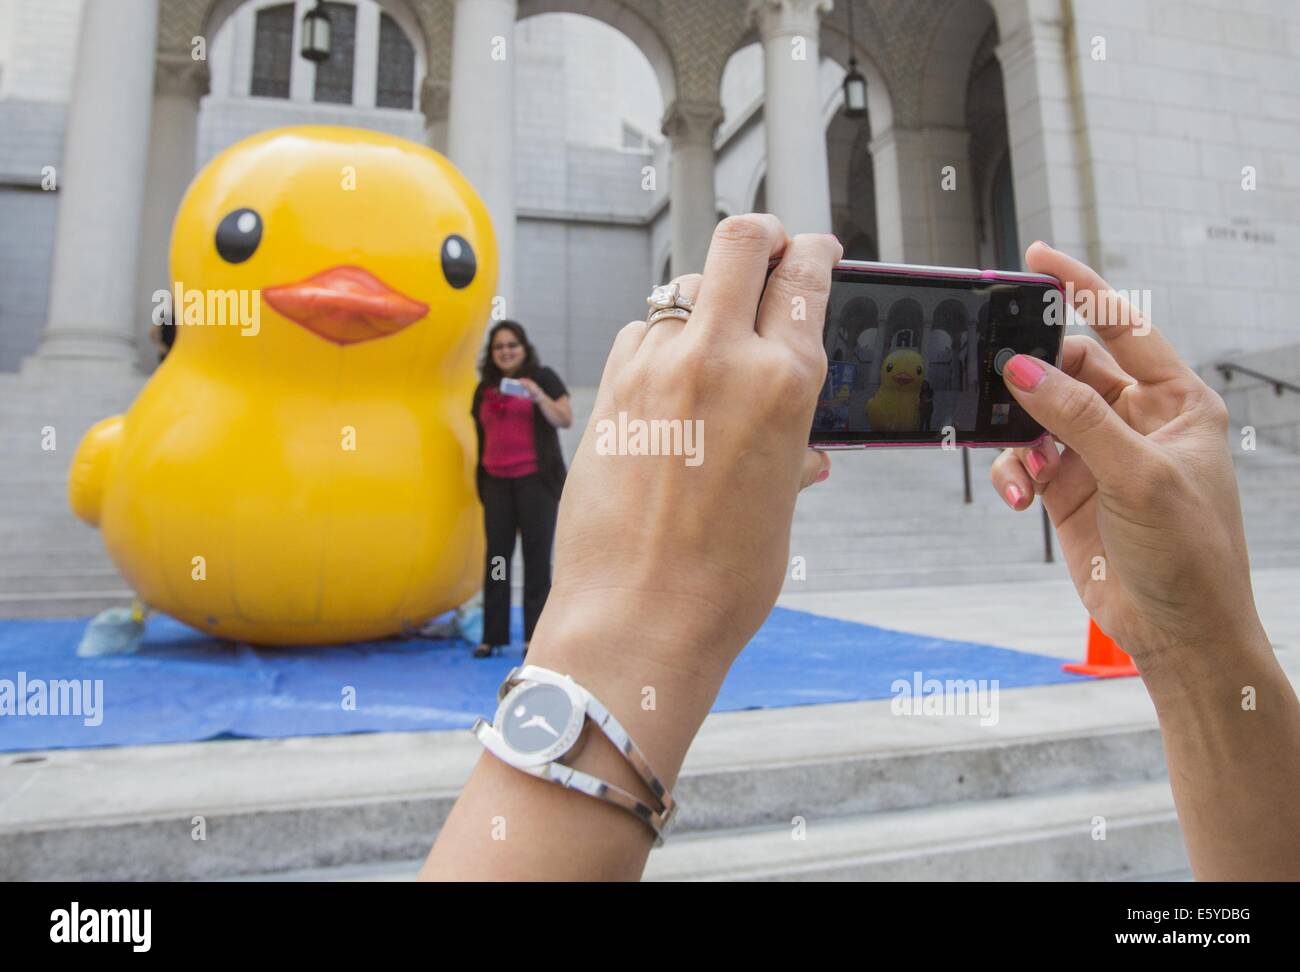 Los Angeles, California, USA. 8th Aug, 2014. People take pictures with a 10-foot-tall rubber ducky ''baby duck'', on the Spring Street steps of Los Angeles City Hall on Friday, Aug. 8, 2014, in Los Angeles. The bright yellow, inflatable ducky is wandering the city in search of its mother, a 60 feet high and dubbed by event organizers as the world's largest rubber ducky as part of a promotional stunt for the Tall Ships Festival taking place Aug. 20-24 at the Port of Los Angeles. Credit:  Ringo Chiu/ZUMA Wire/Alamy Live News Stock Photo